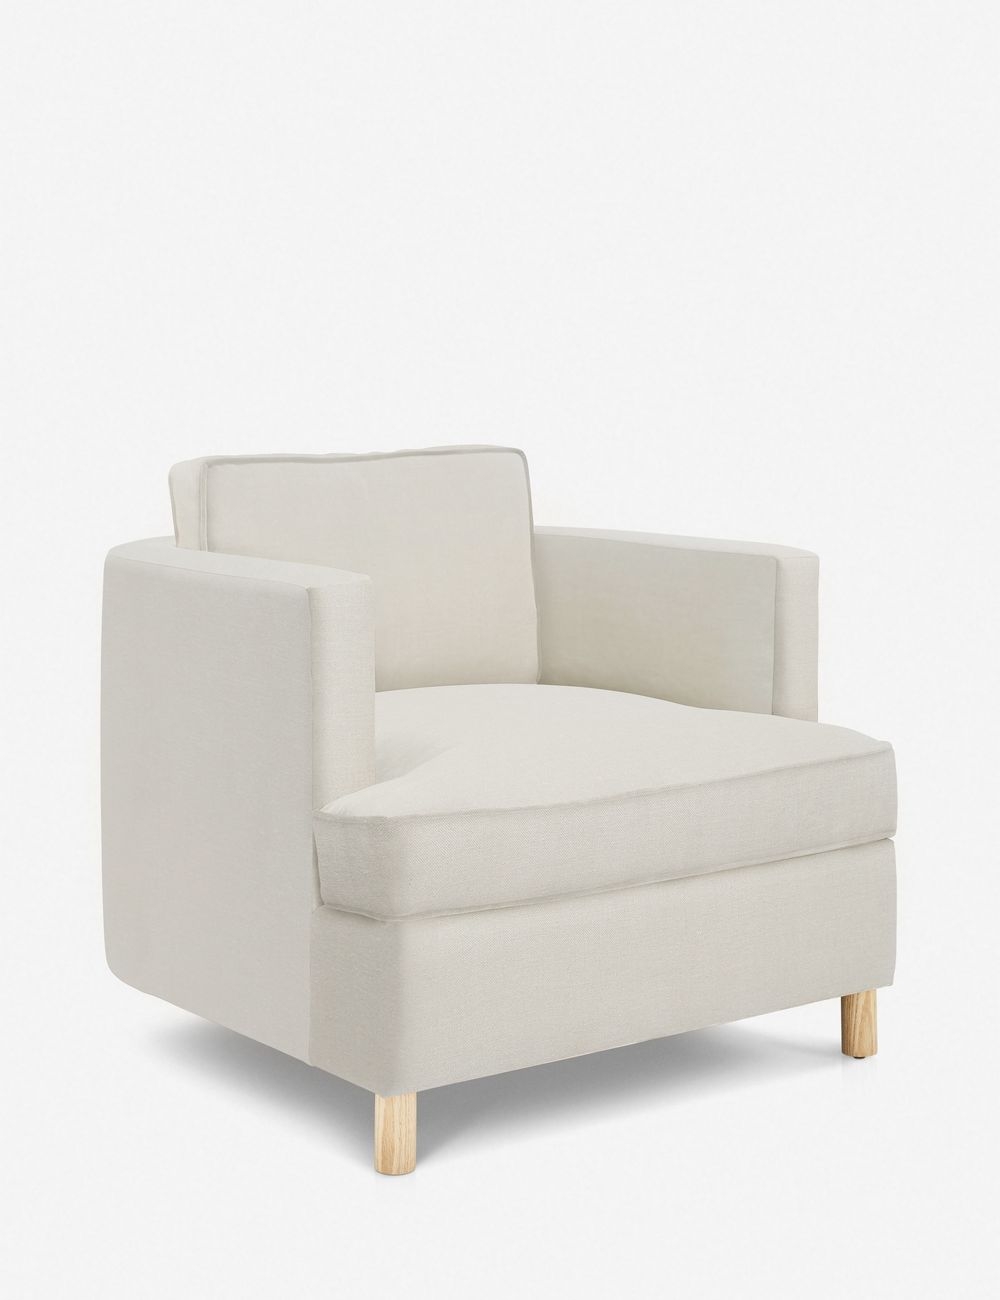 Belmont Accent Chair by Ginny Macdonald - Image 2